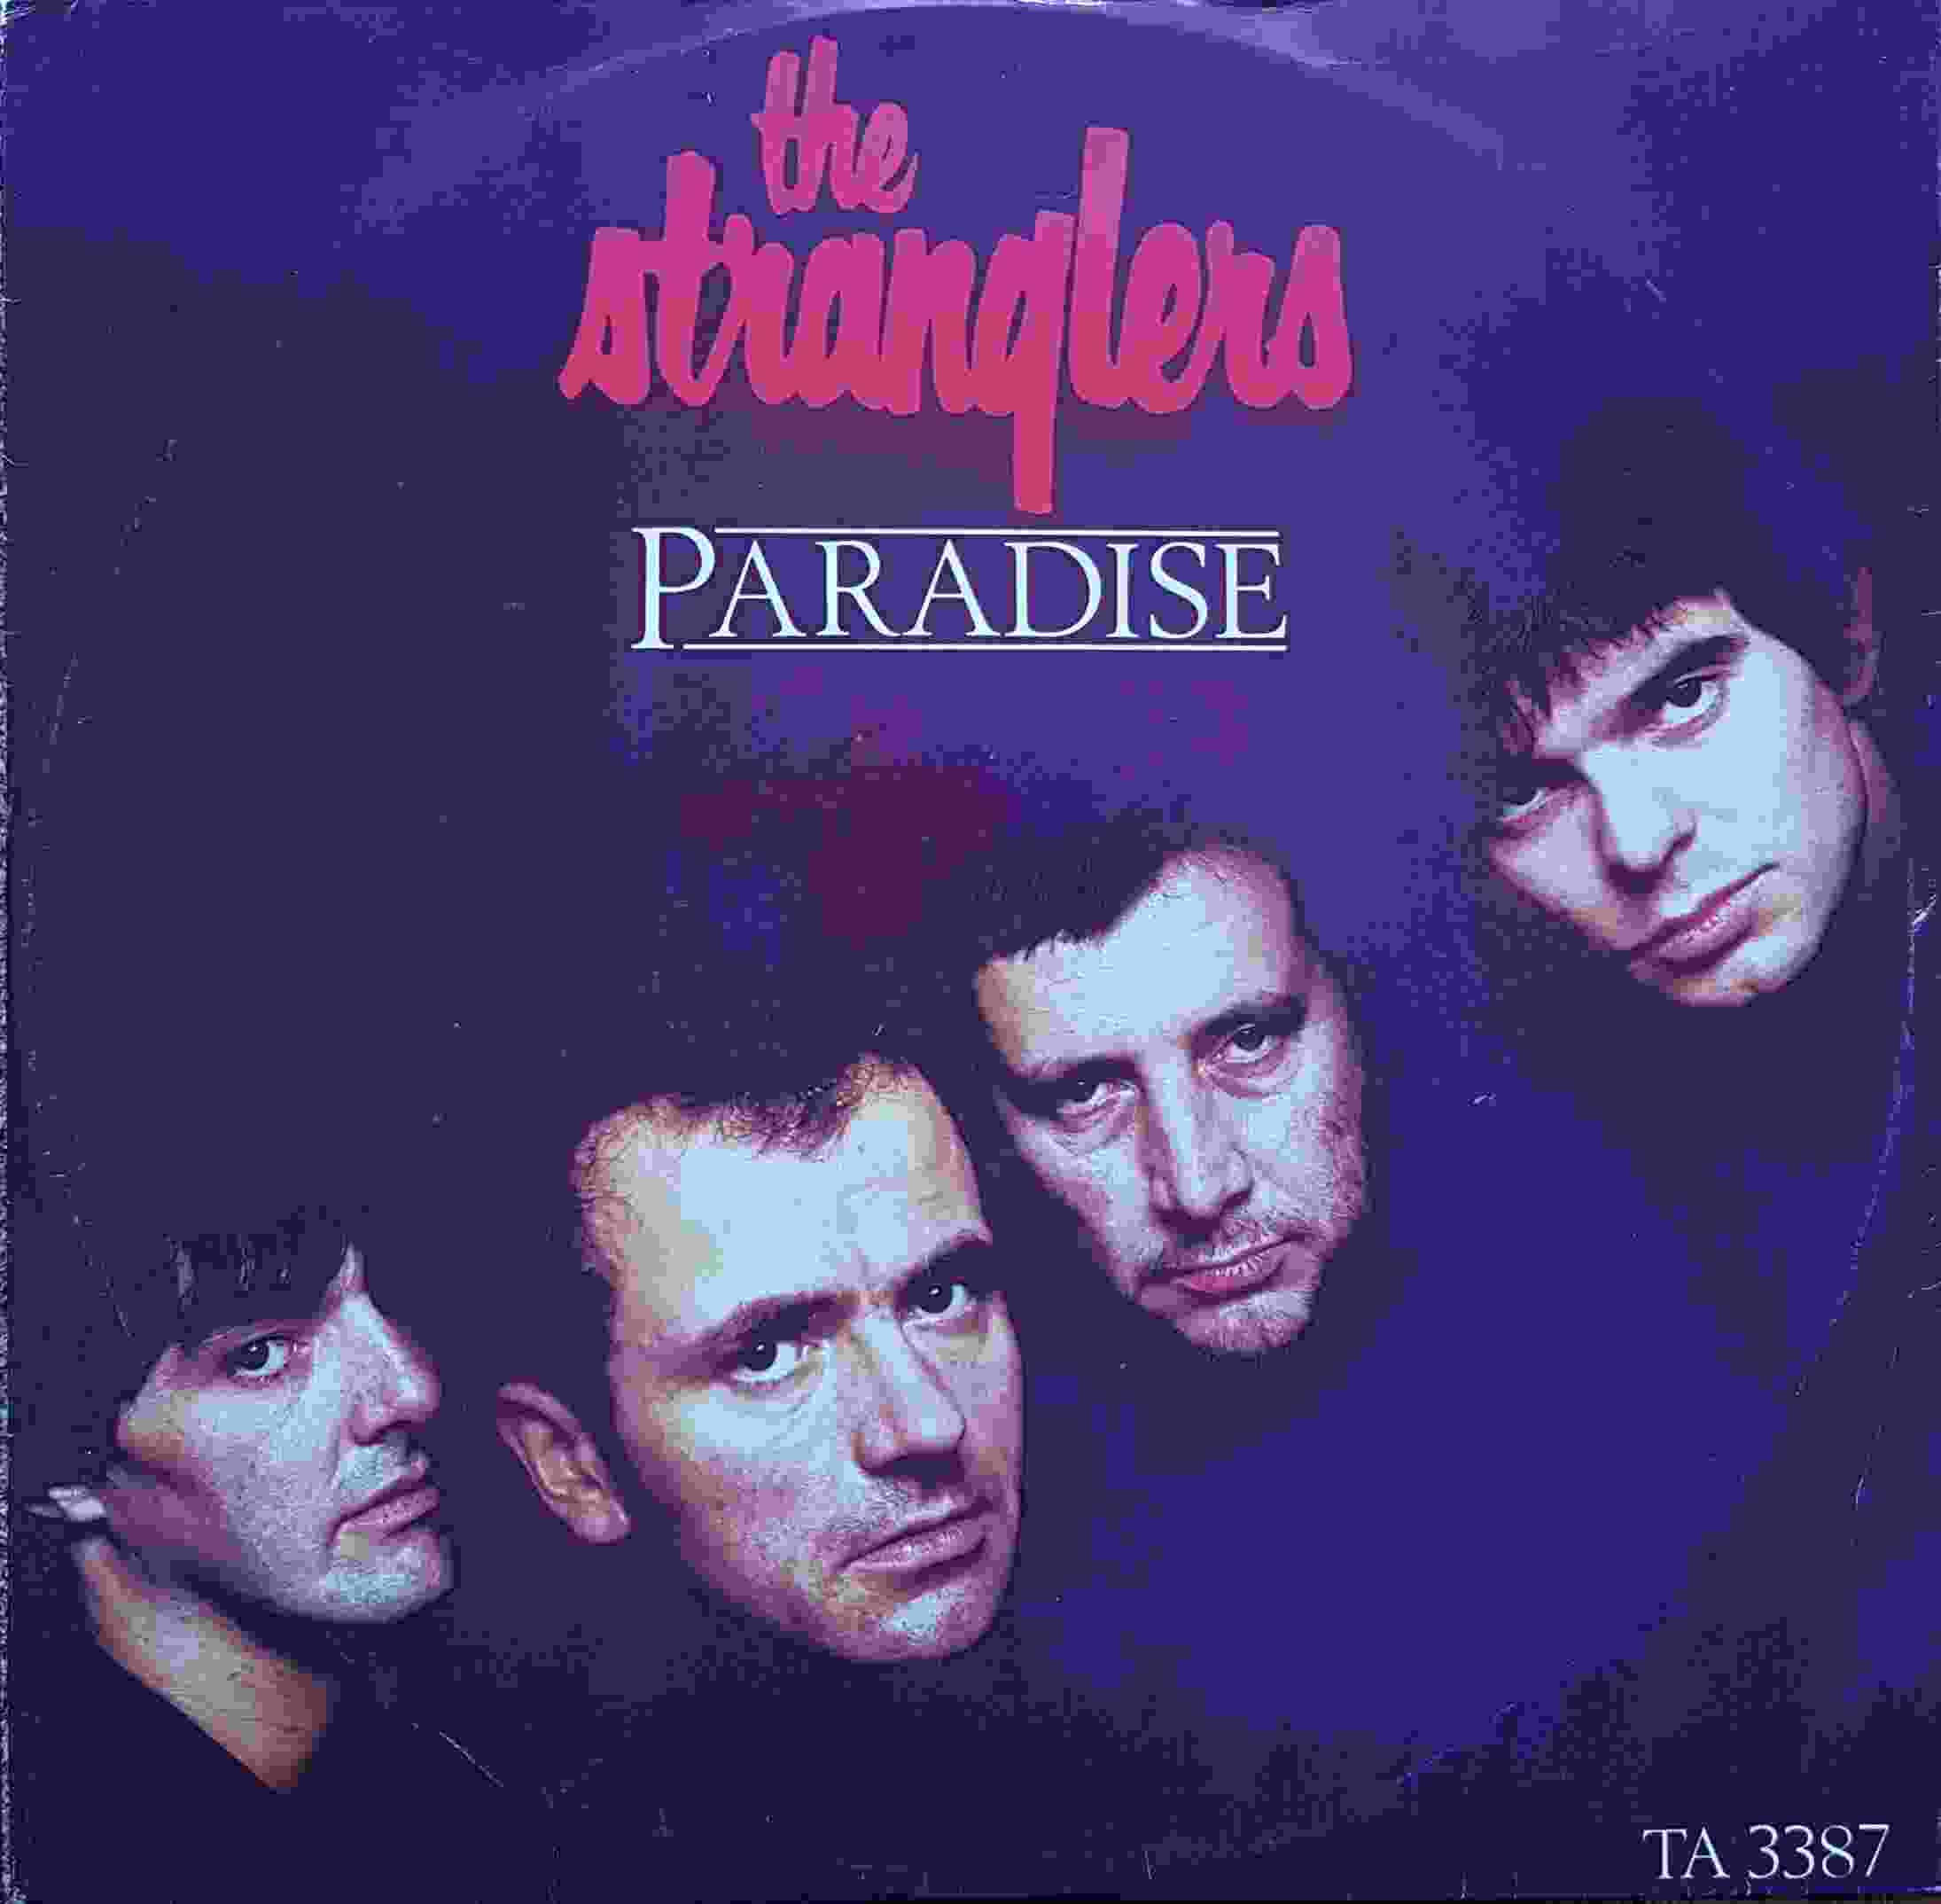 Picture of TA 3387 Paradise by artist The Stranglers from The Stranglers